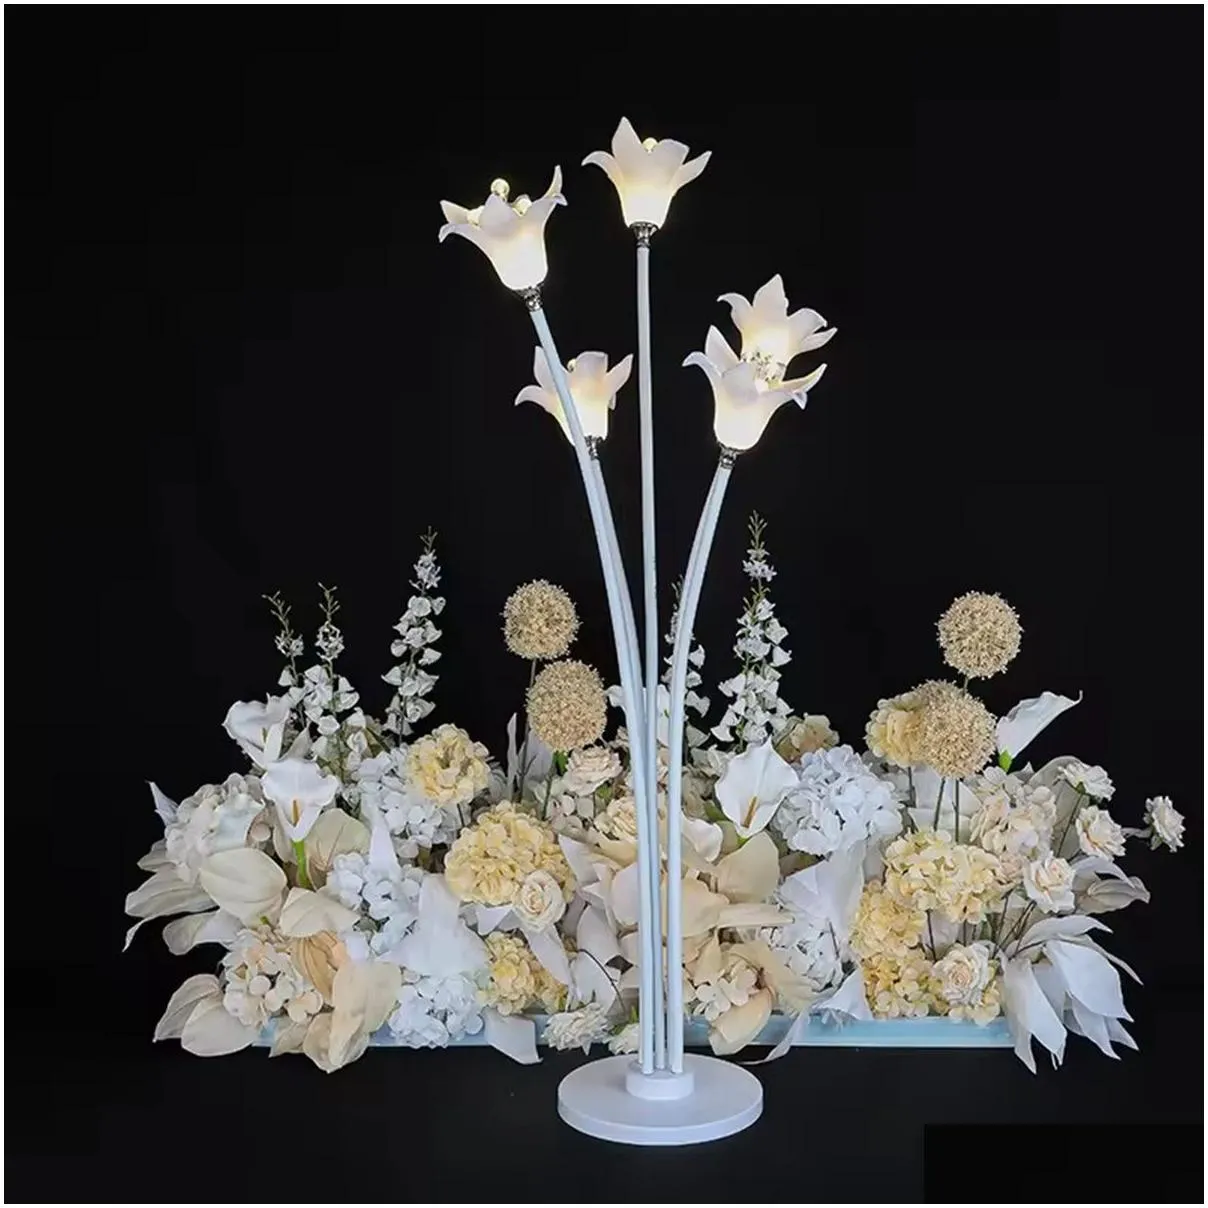 many -head metal gold candlestick ac powered led light source for wedding sta decoration table centerpiece walkway pillar